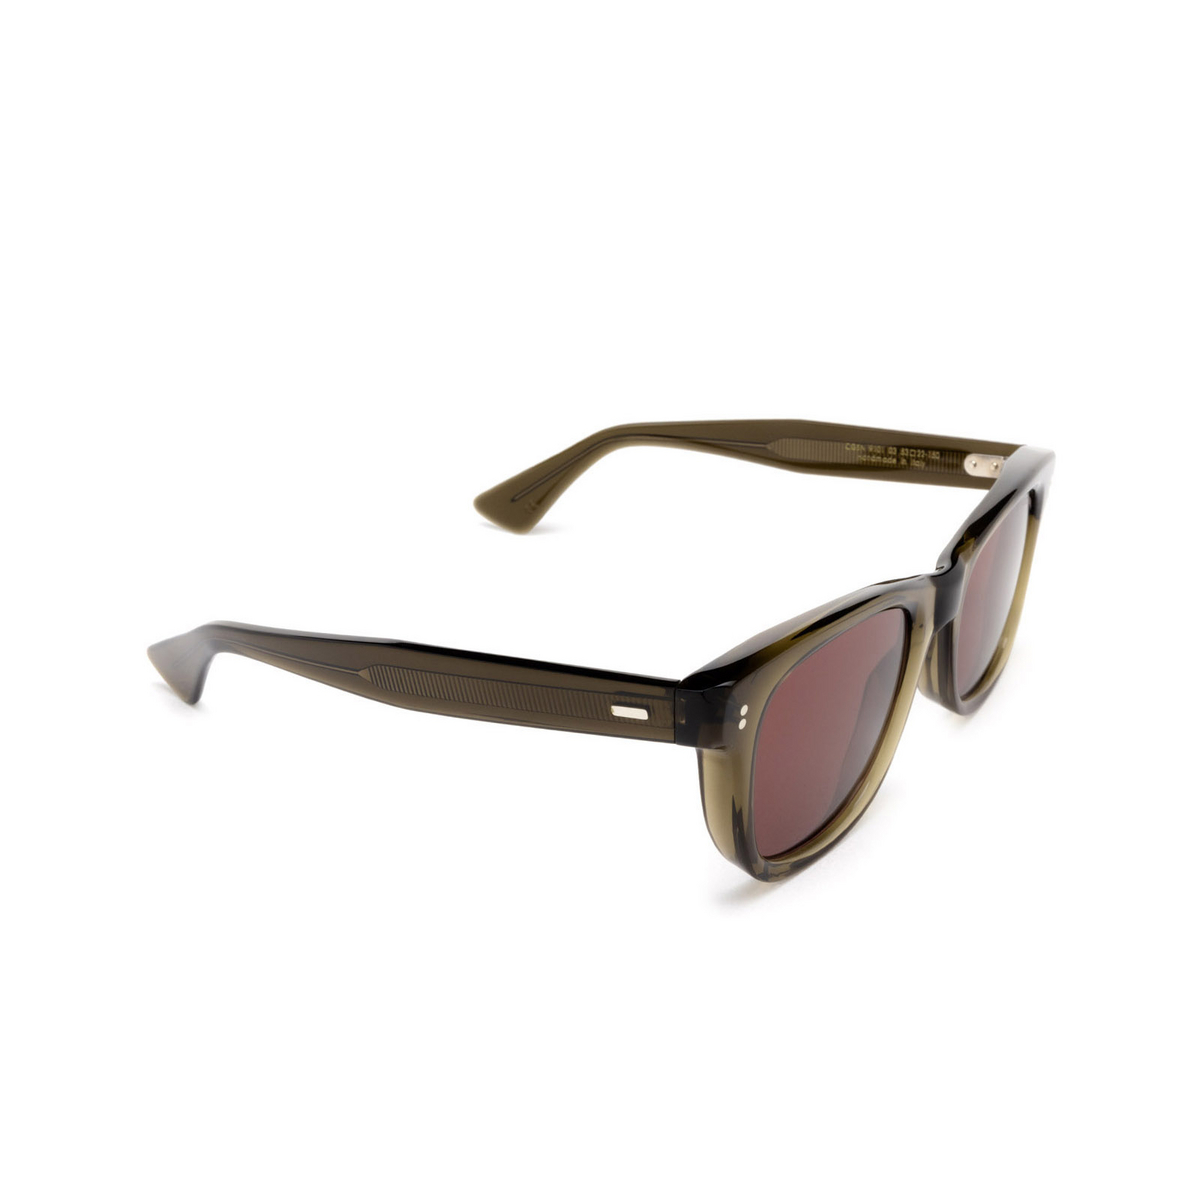 Cutler and Gross 9101 Sunglasses 03 Olive - three-quarters view